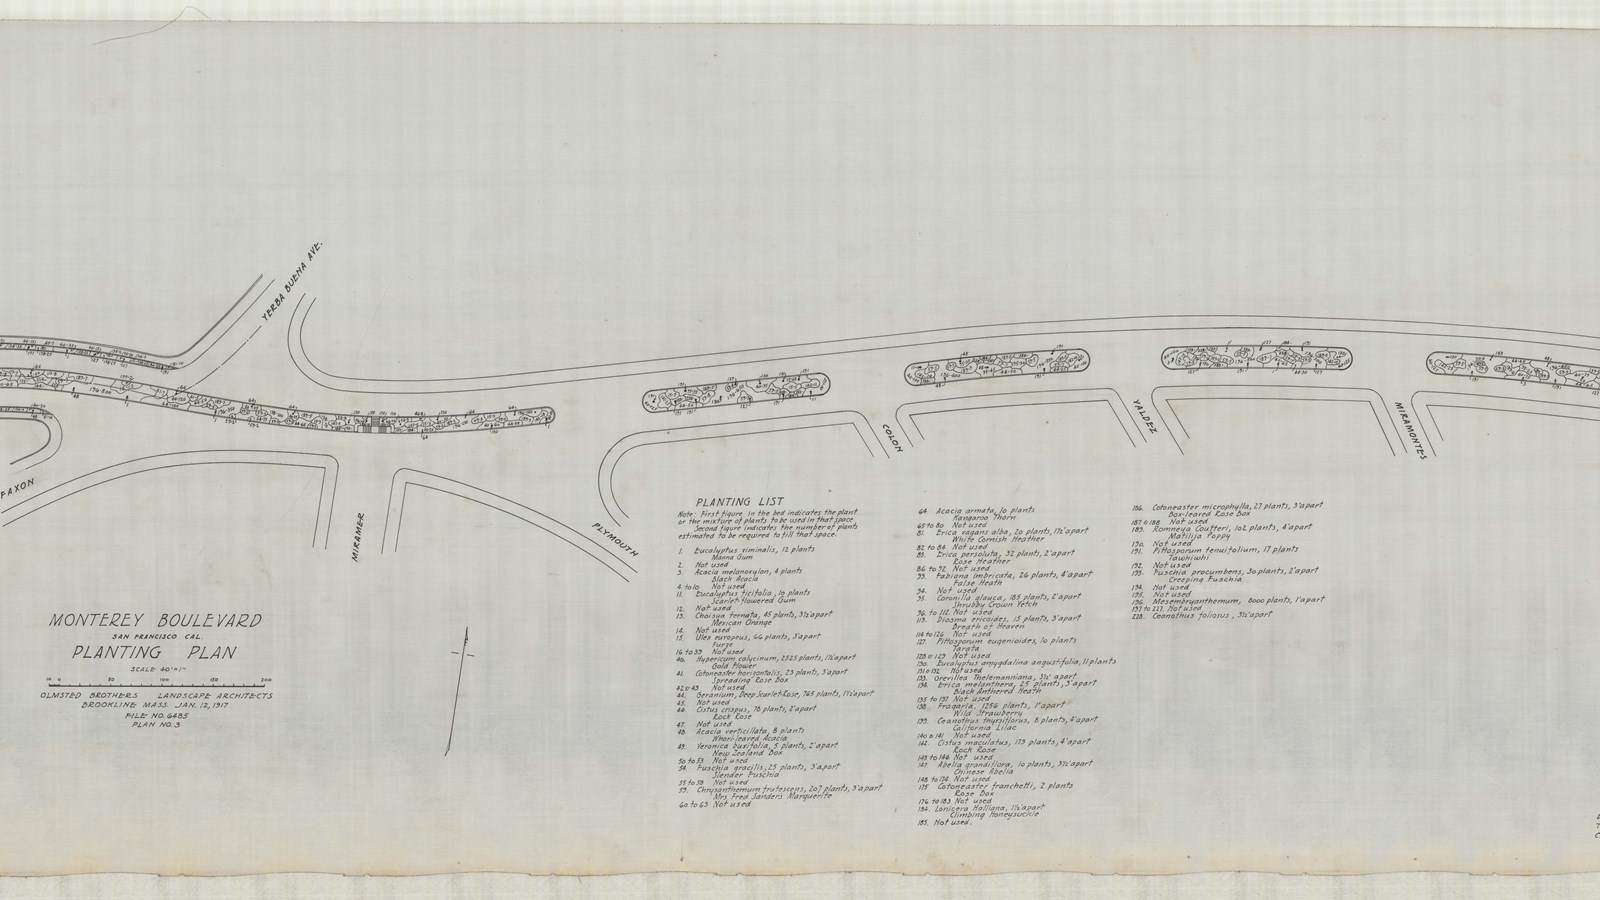 Pencil plan of long road with skinny ovals in middle filled with plants